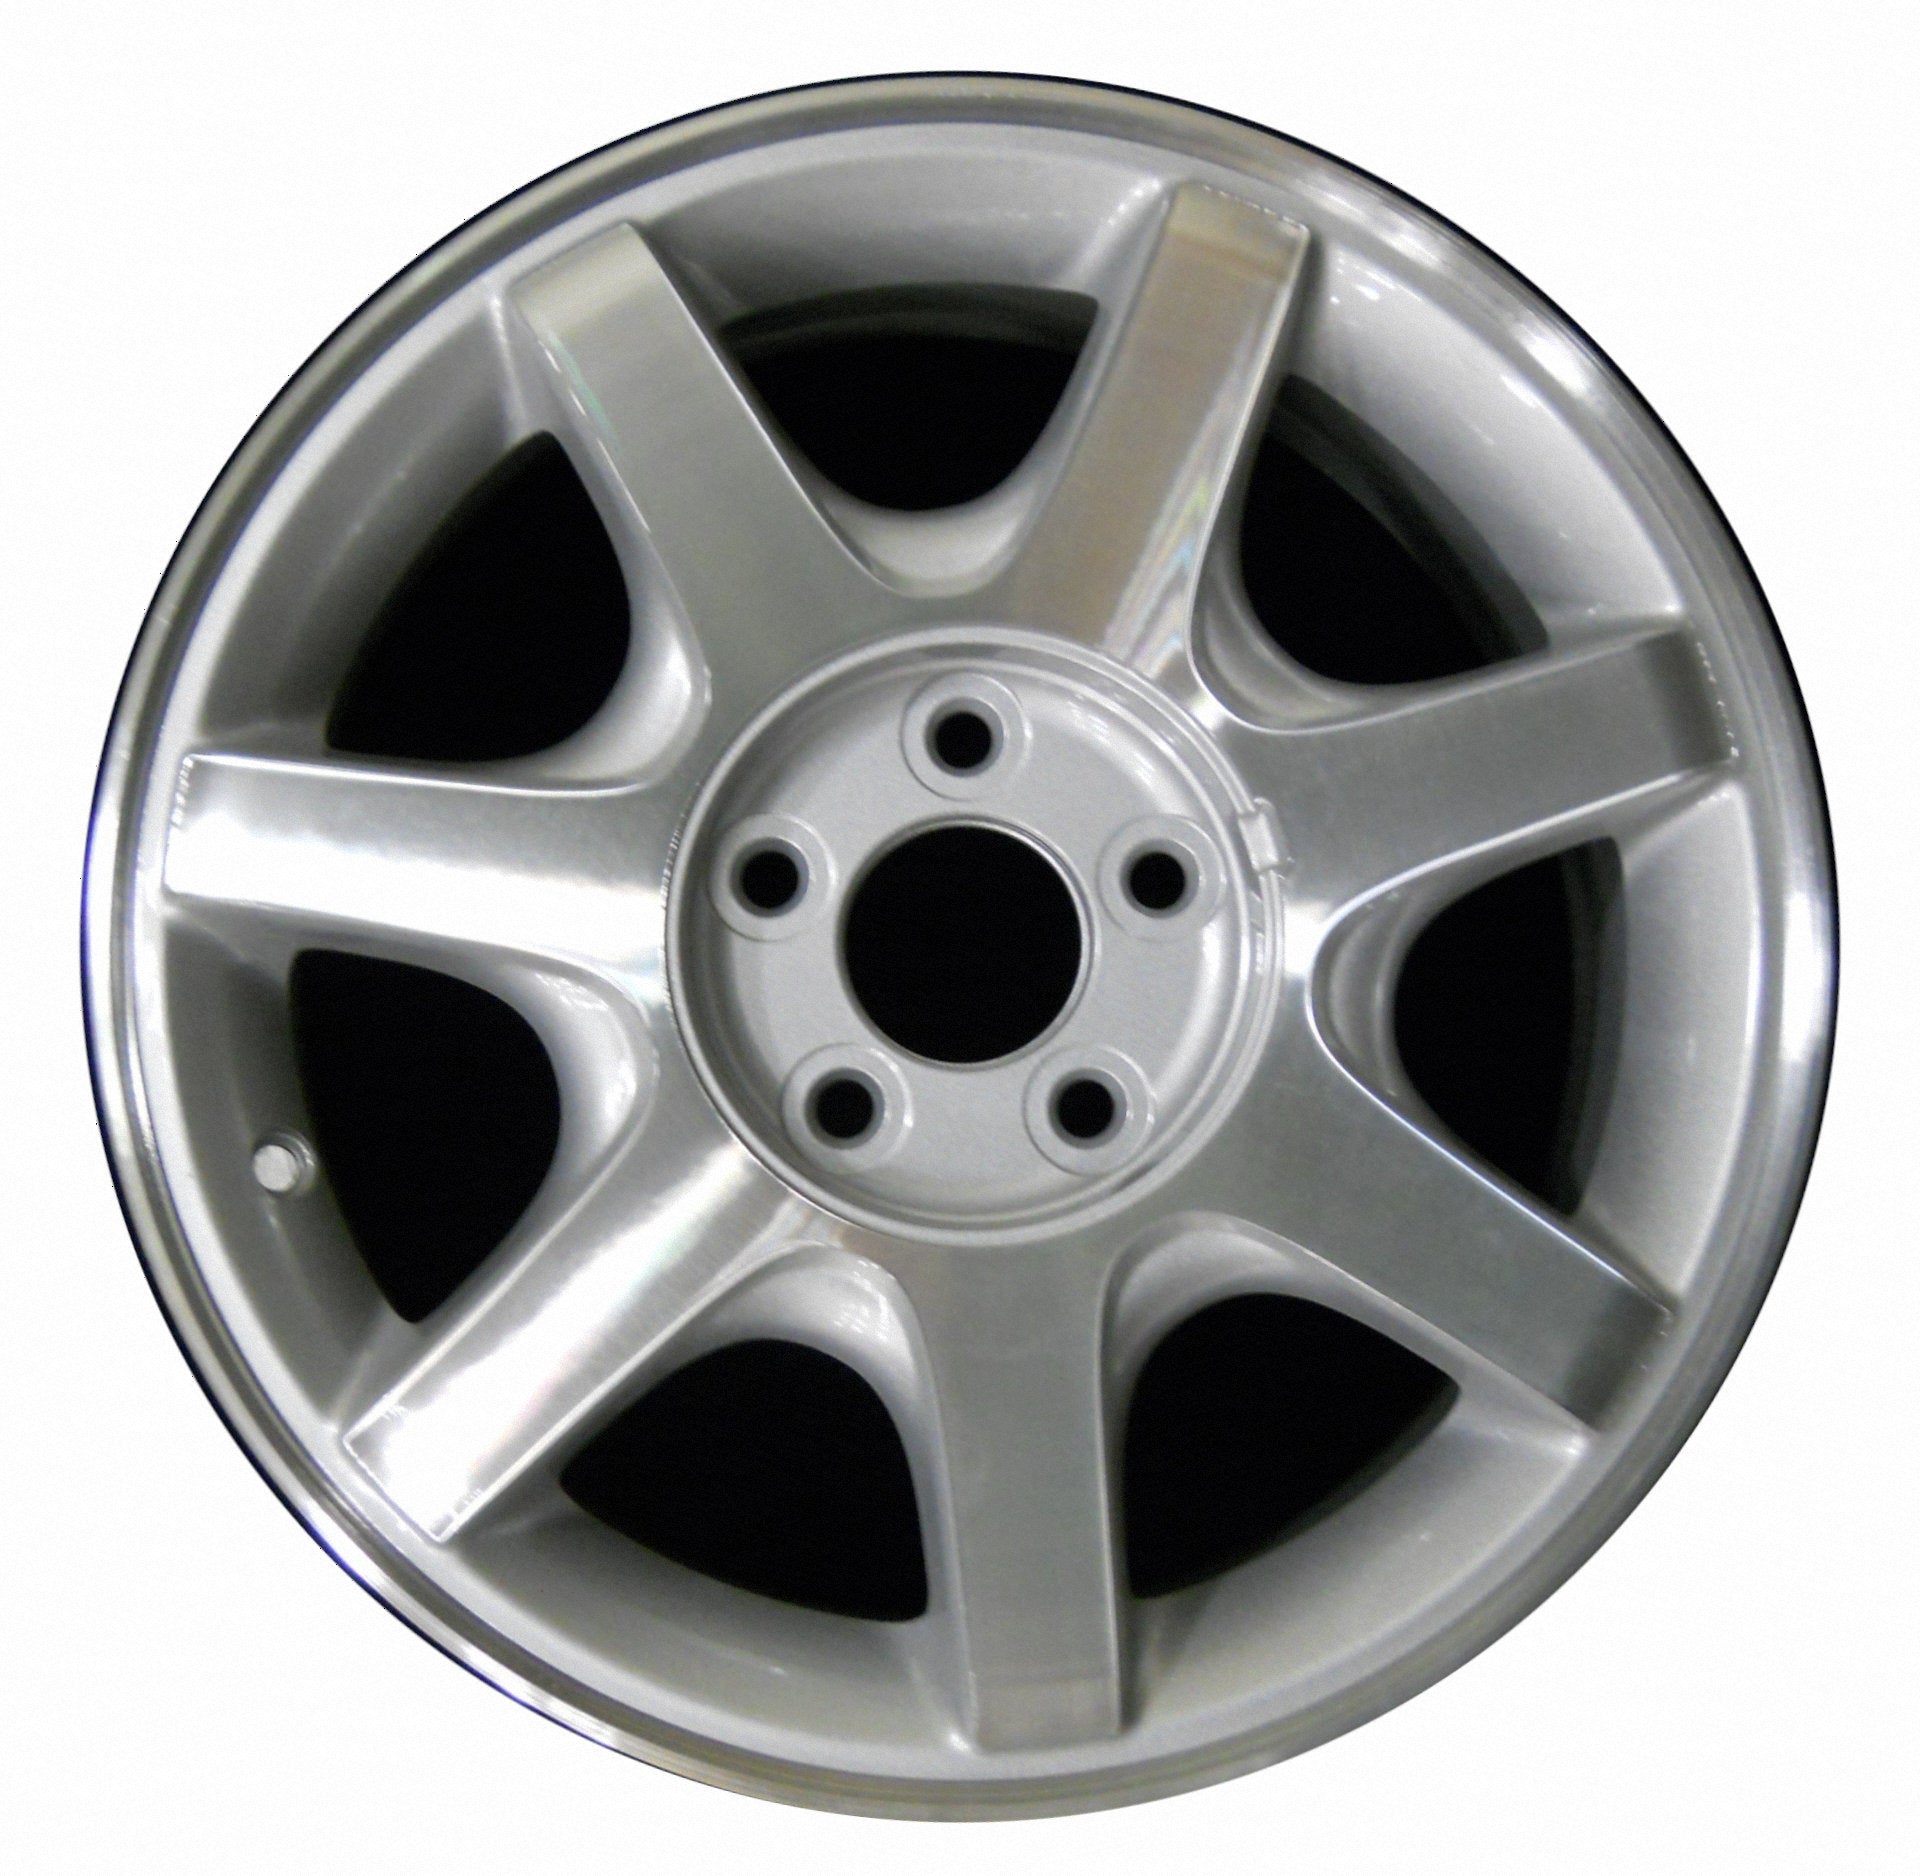 Ford Taurus  2000, 2001, 2002, 2003, 2004, 2005, 2006, 2007 Factory OEM Car Wheel Size 16x6 Alloy WAO.3360.PS02.MA